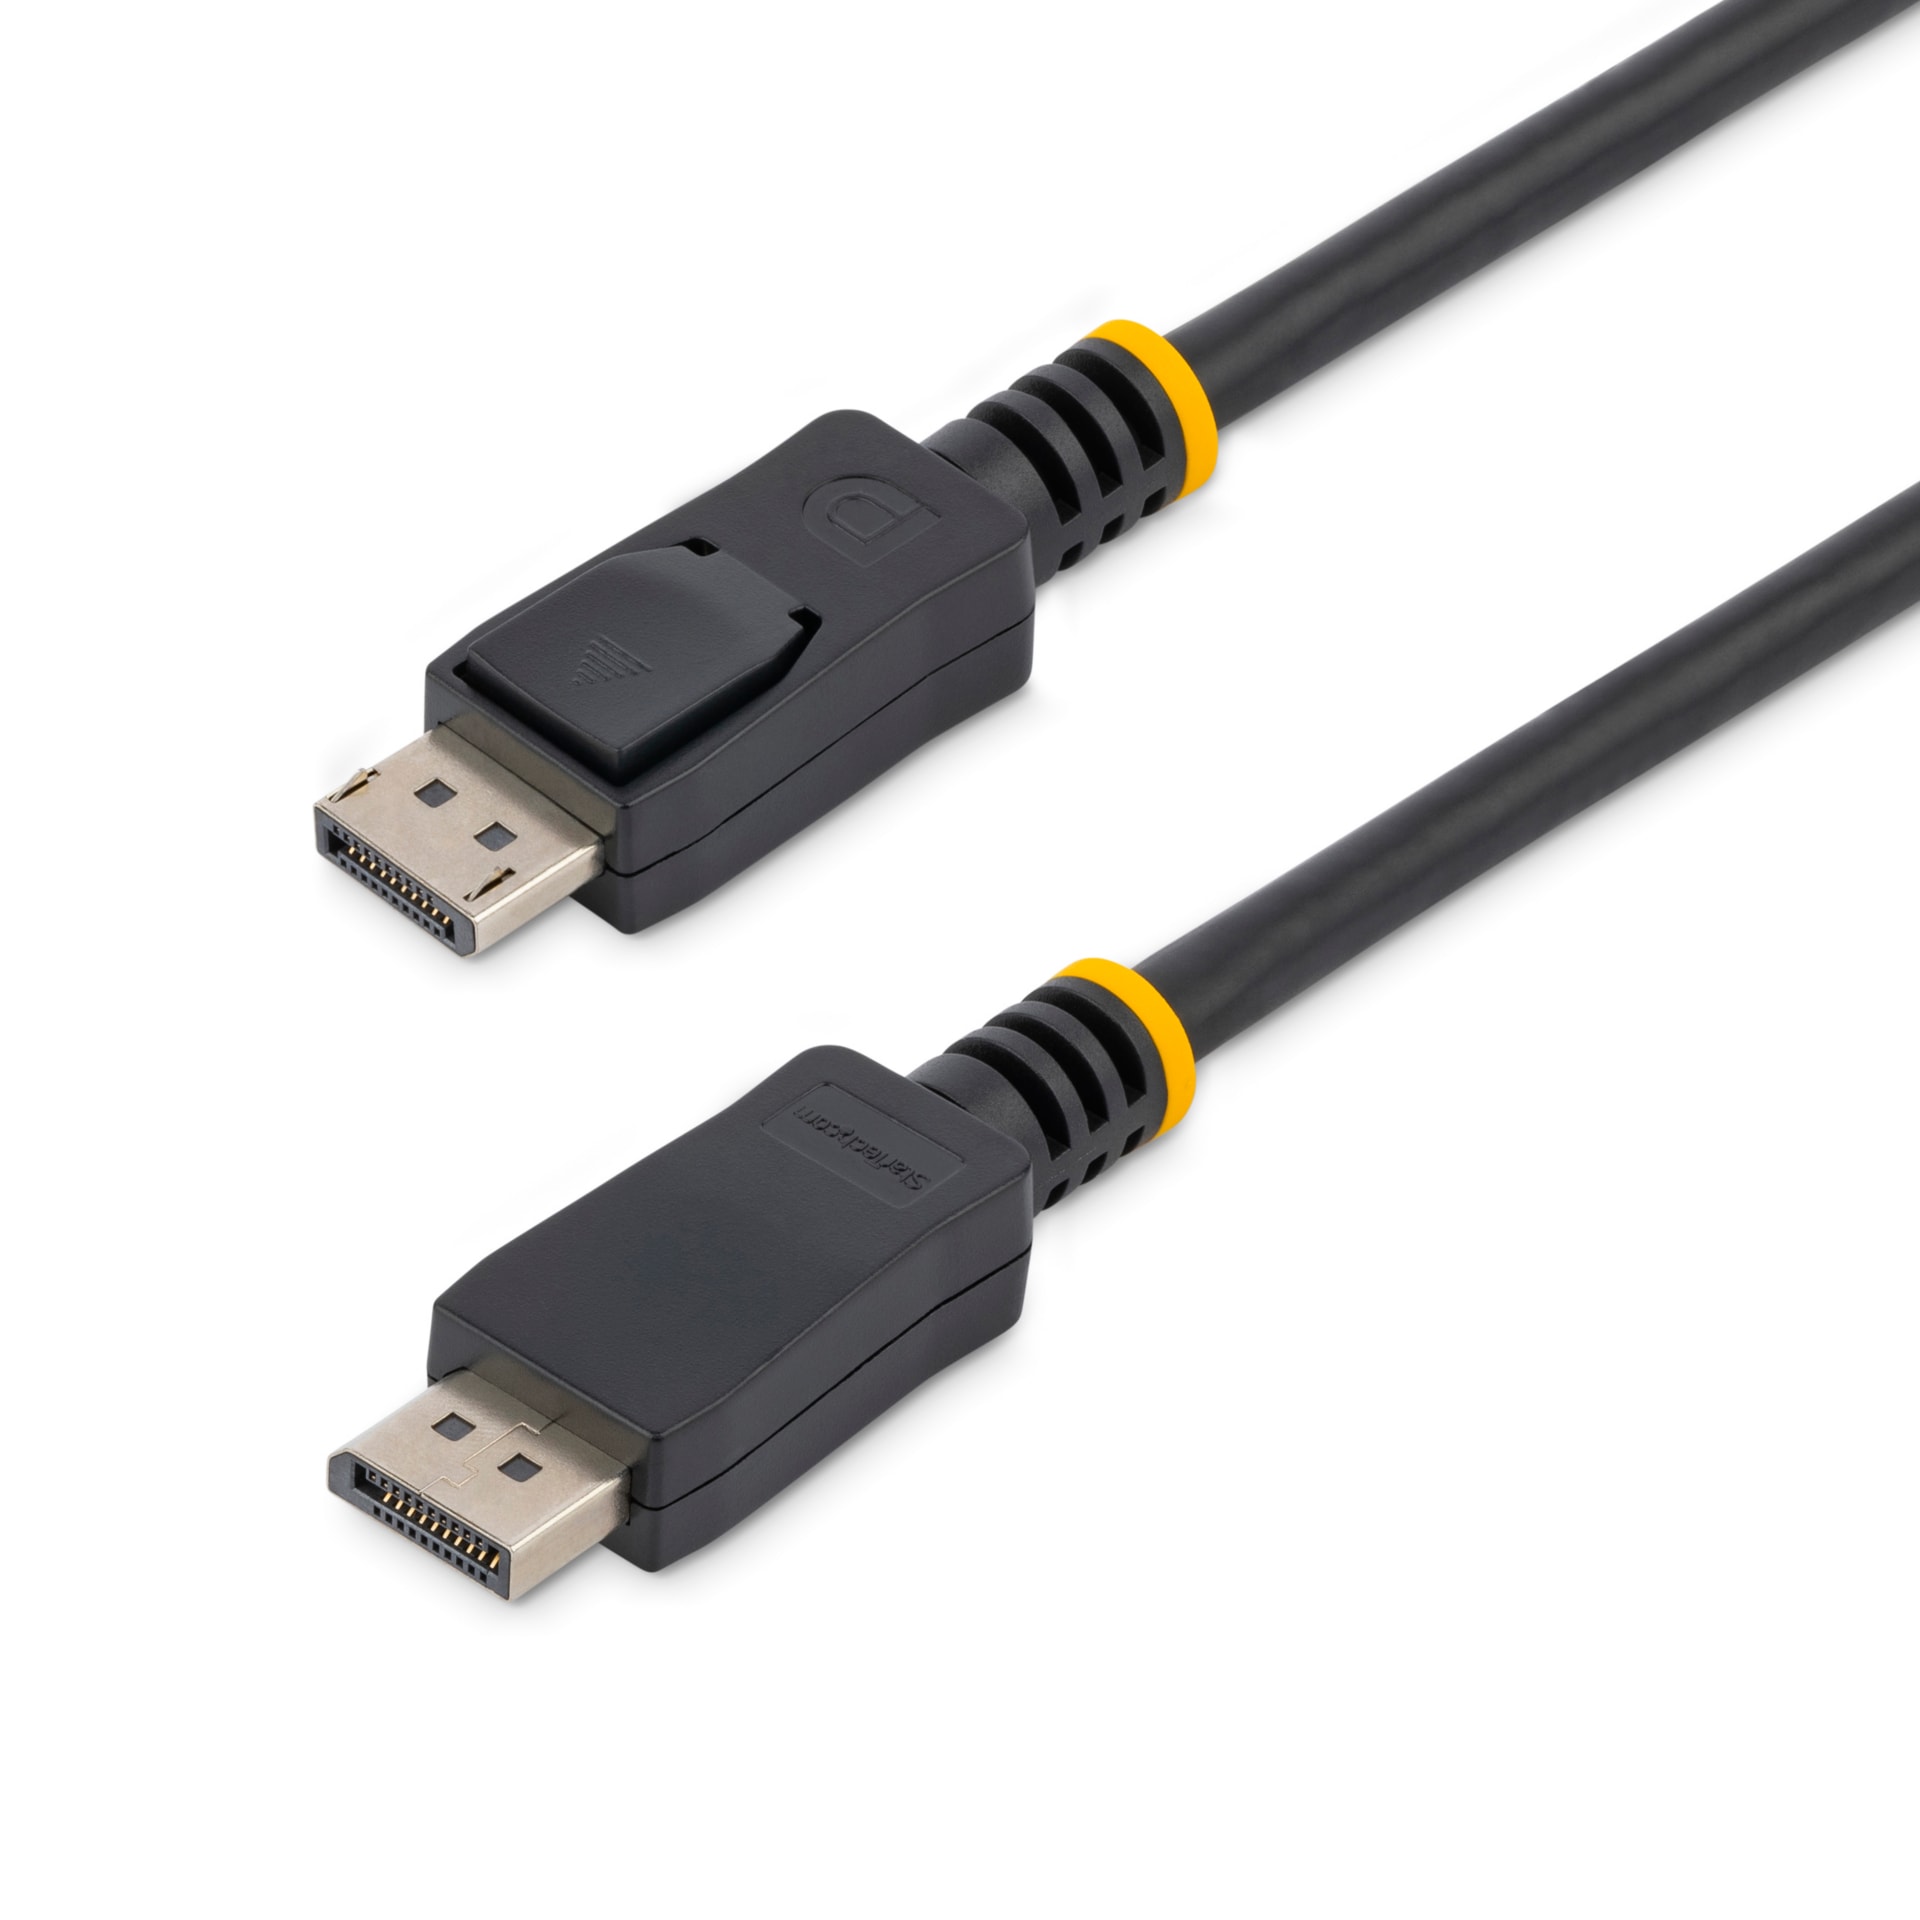 StarTech.com 10ft DisplayPort 1.2 Cable - 4K x 2K VESA Certified DP Cable/Cord for Monitor - Latches